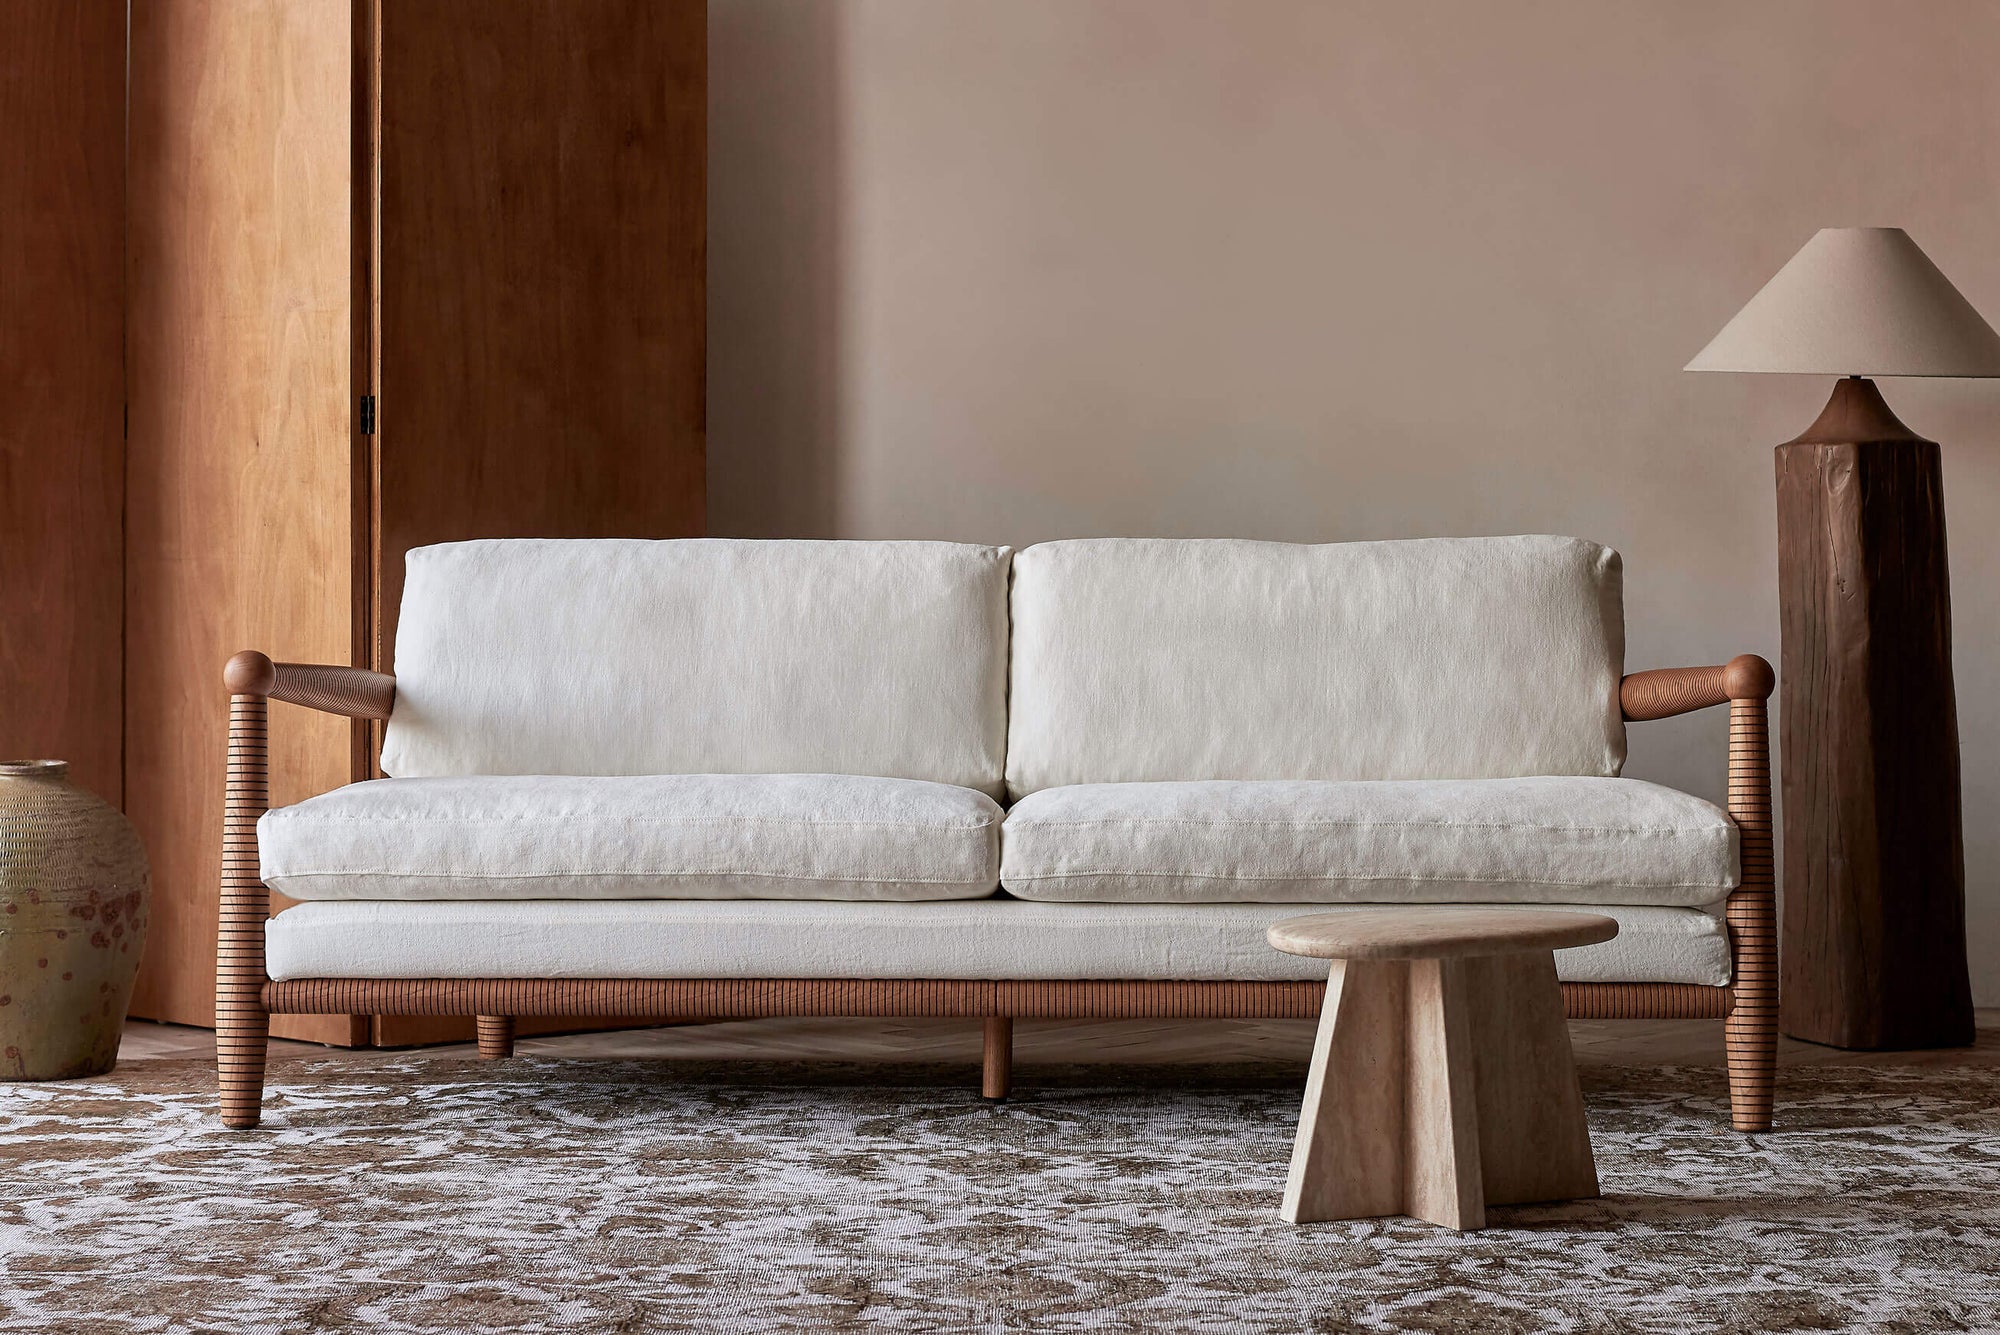 Gio 84" Sofa in a Heritage Ash wood frame with Light Weight Linen Water Lily slipcover, placed in a room with decorative pillars and side tables